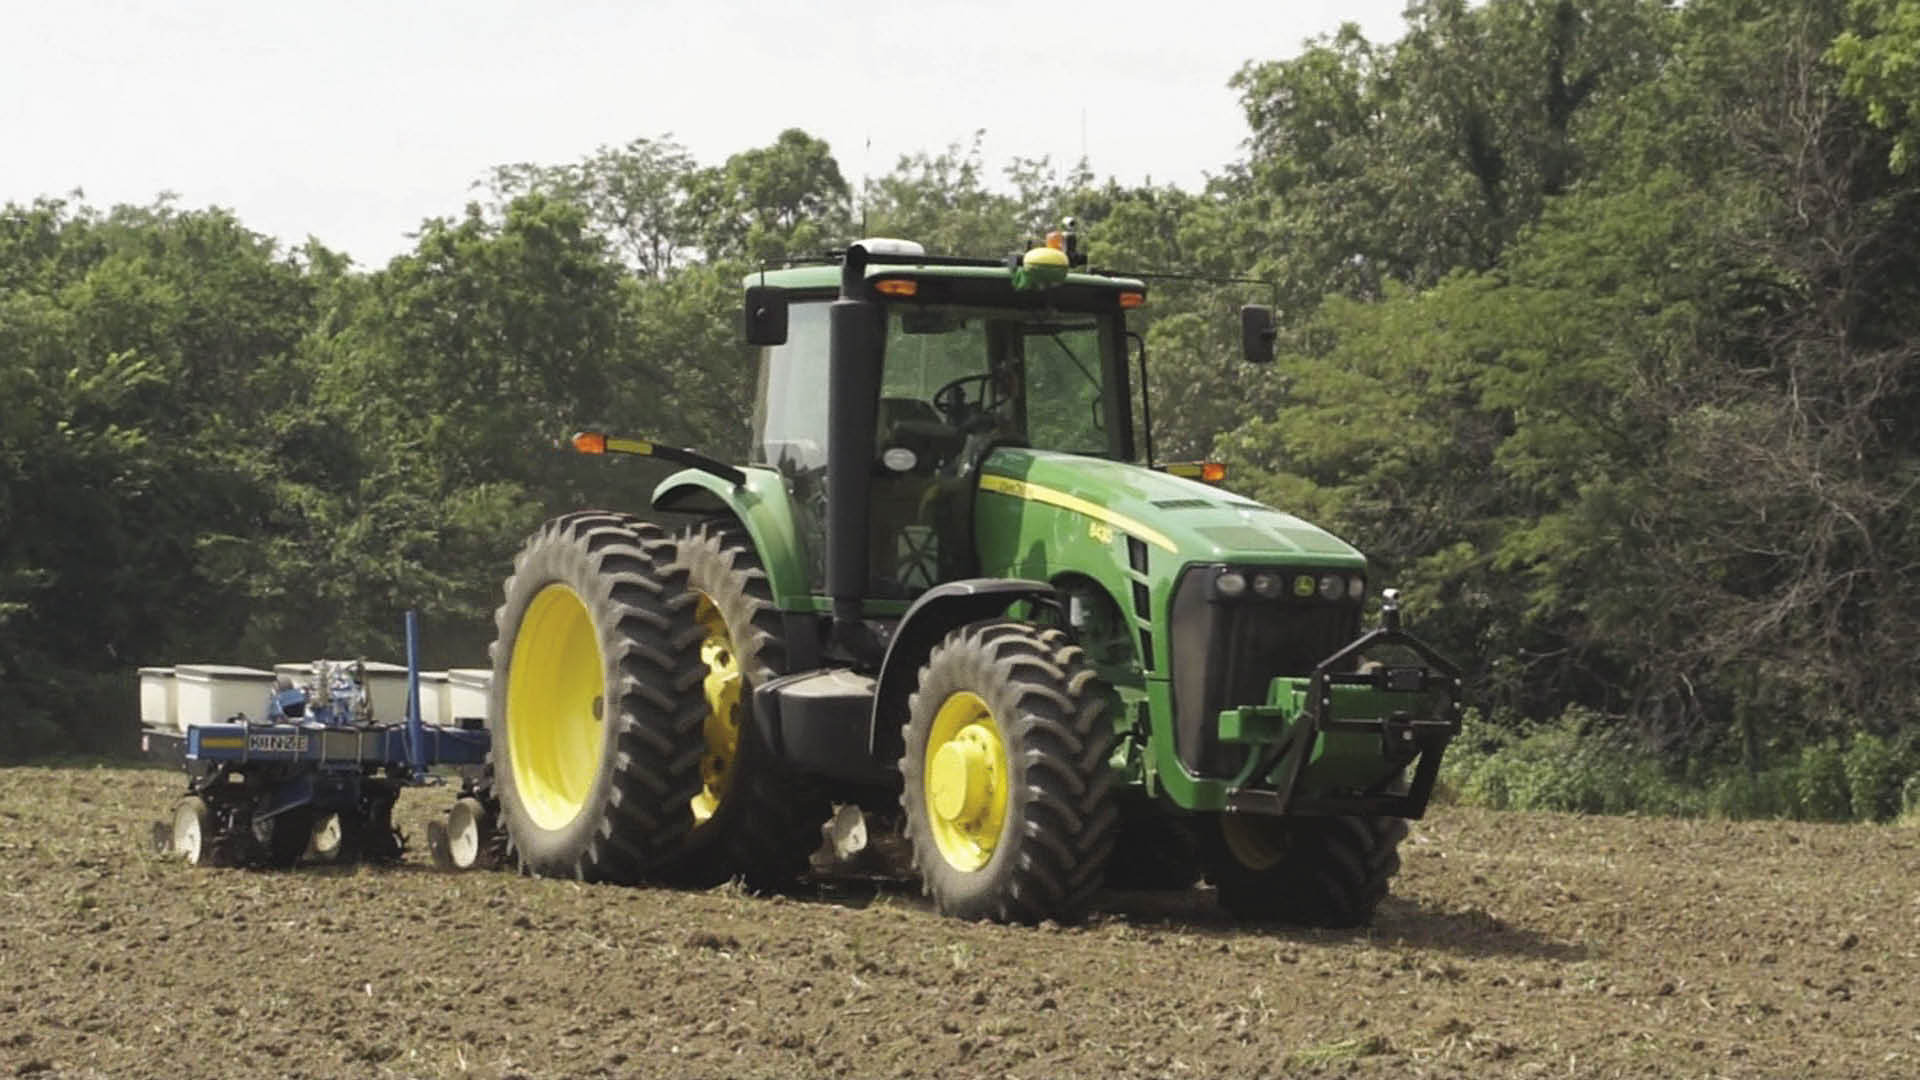 Kinze’s autonomous planting system (pictured in a demo here) is a possibility for the 2020s, but individual row control to dial up accuracy is almost a certainty, experts say.